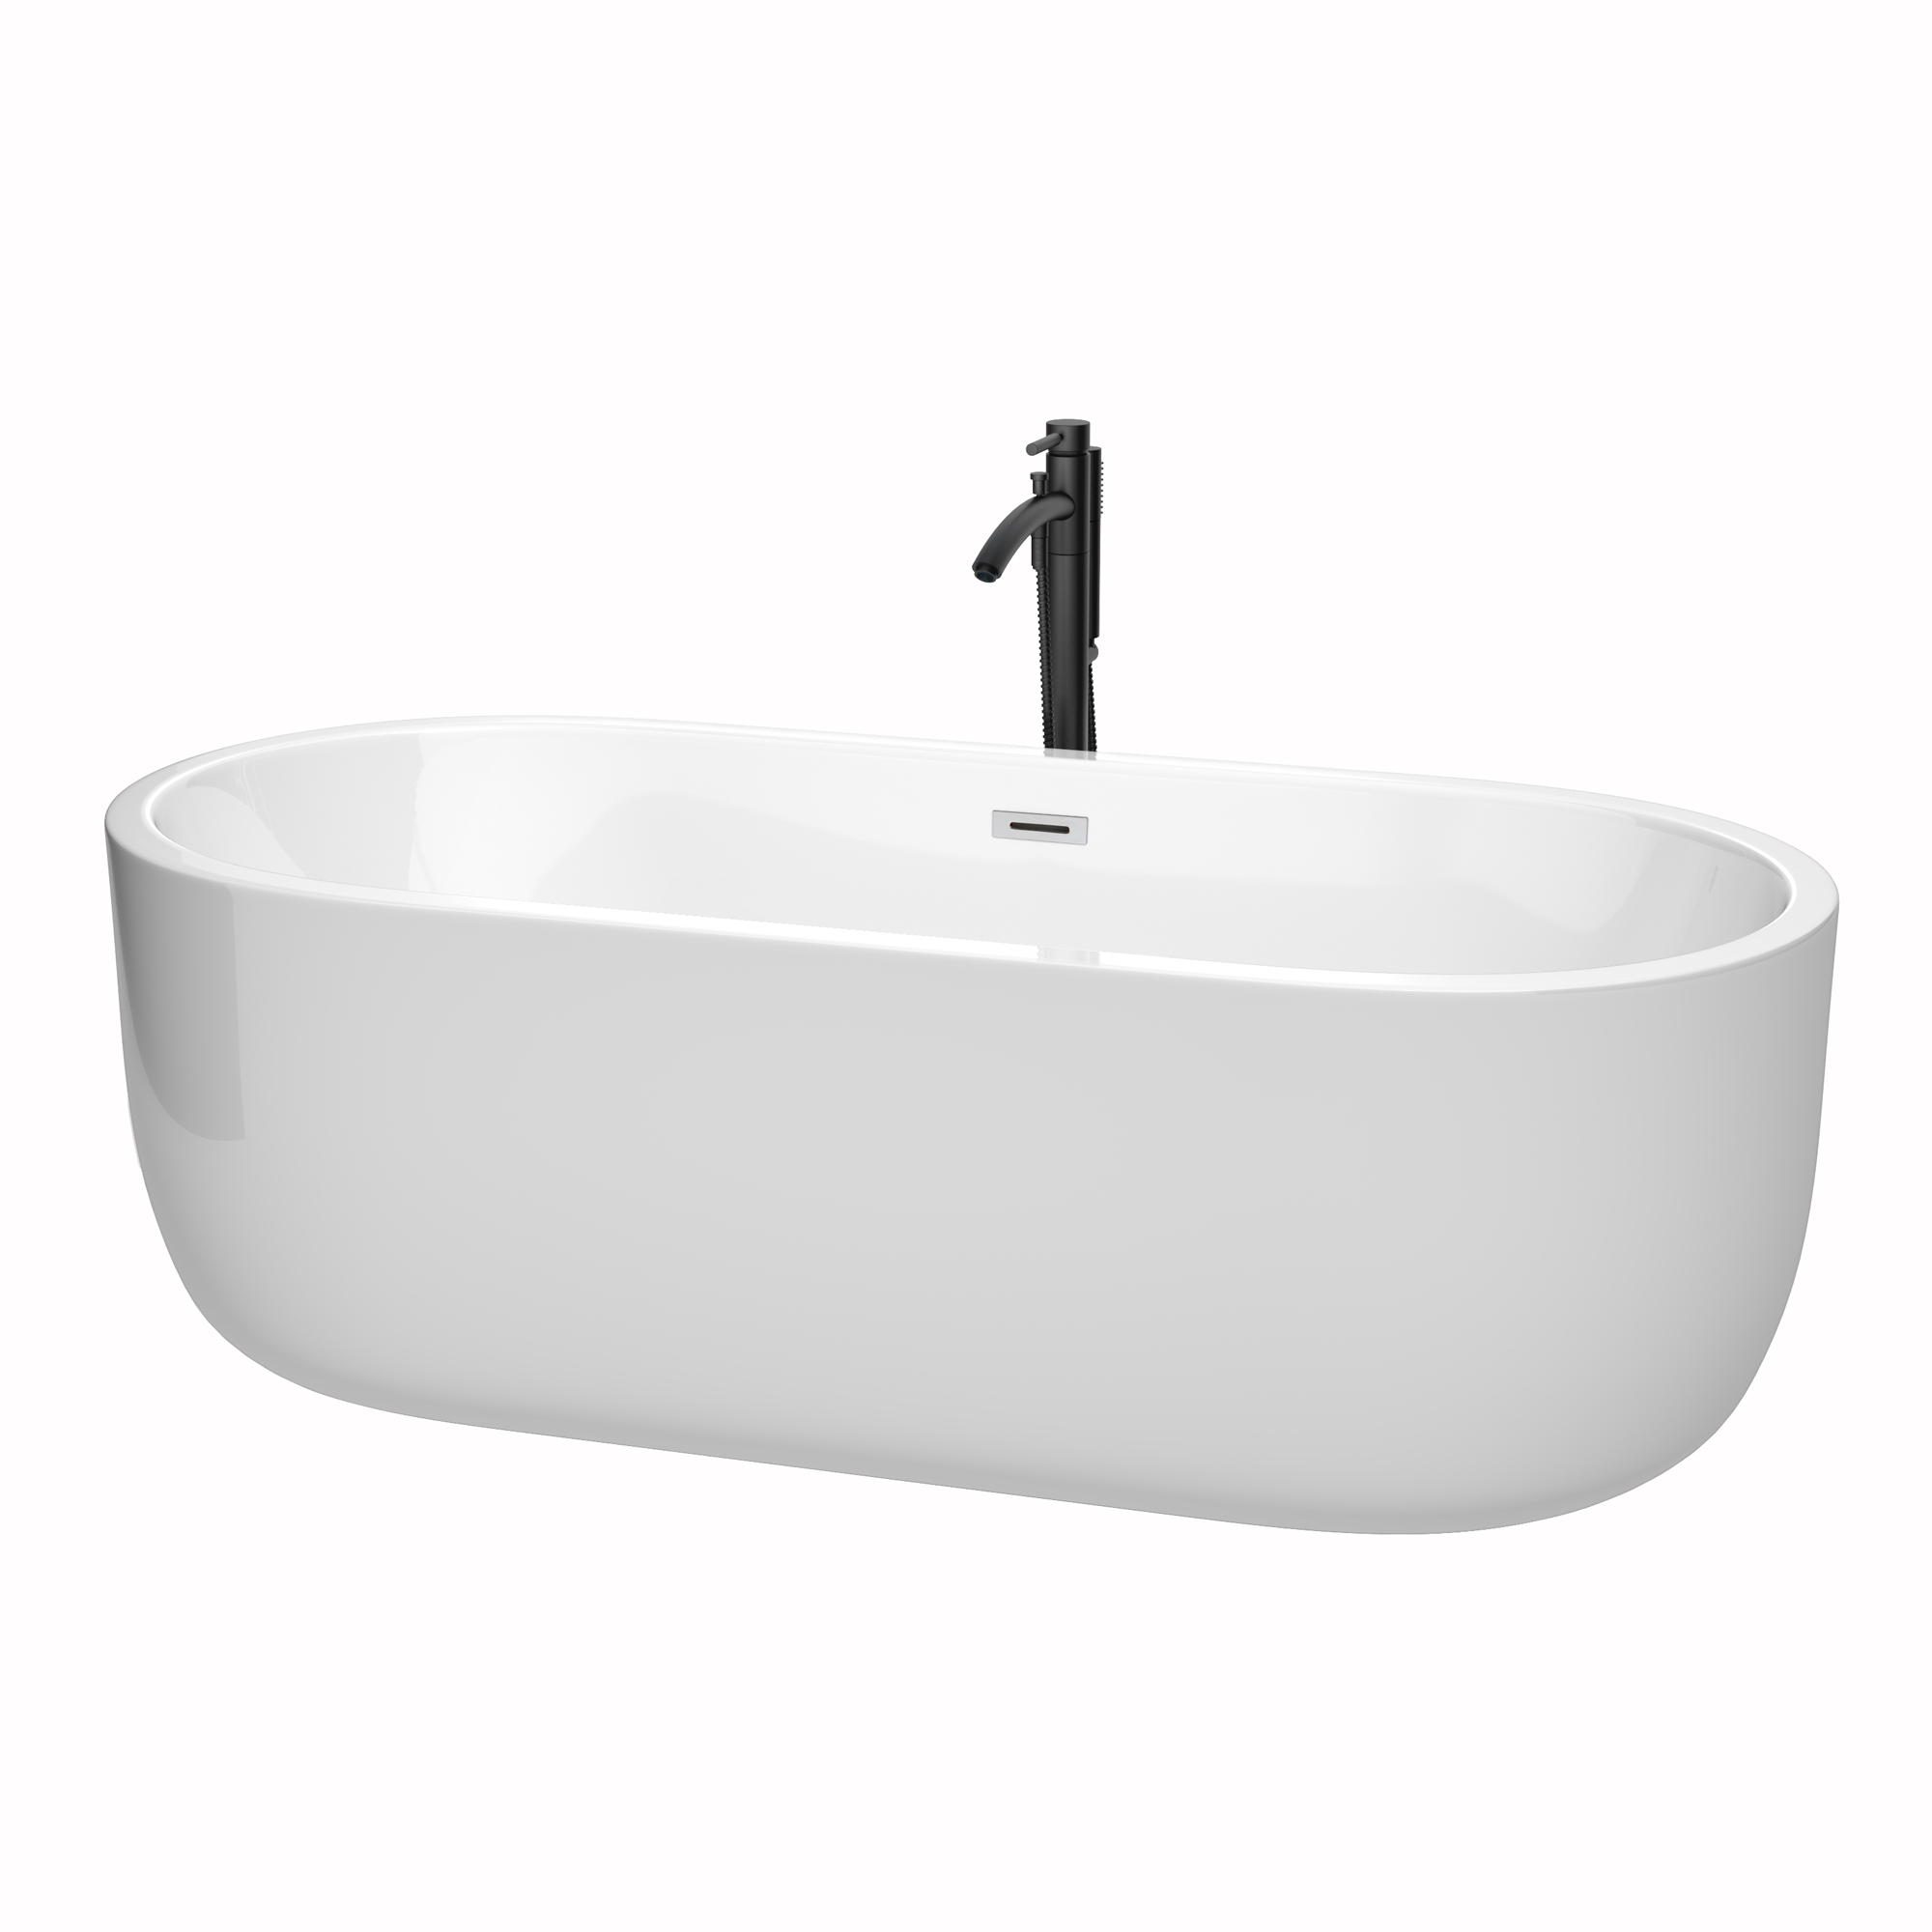 71" Freestanding Bathtub in White with Floor Mounted Faucet in Matte Black and Polished Chrome Trim